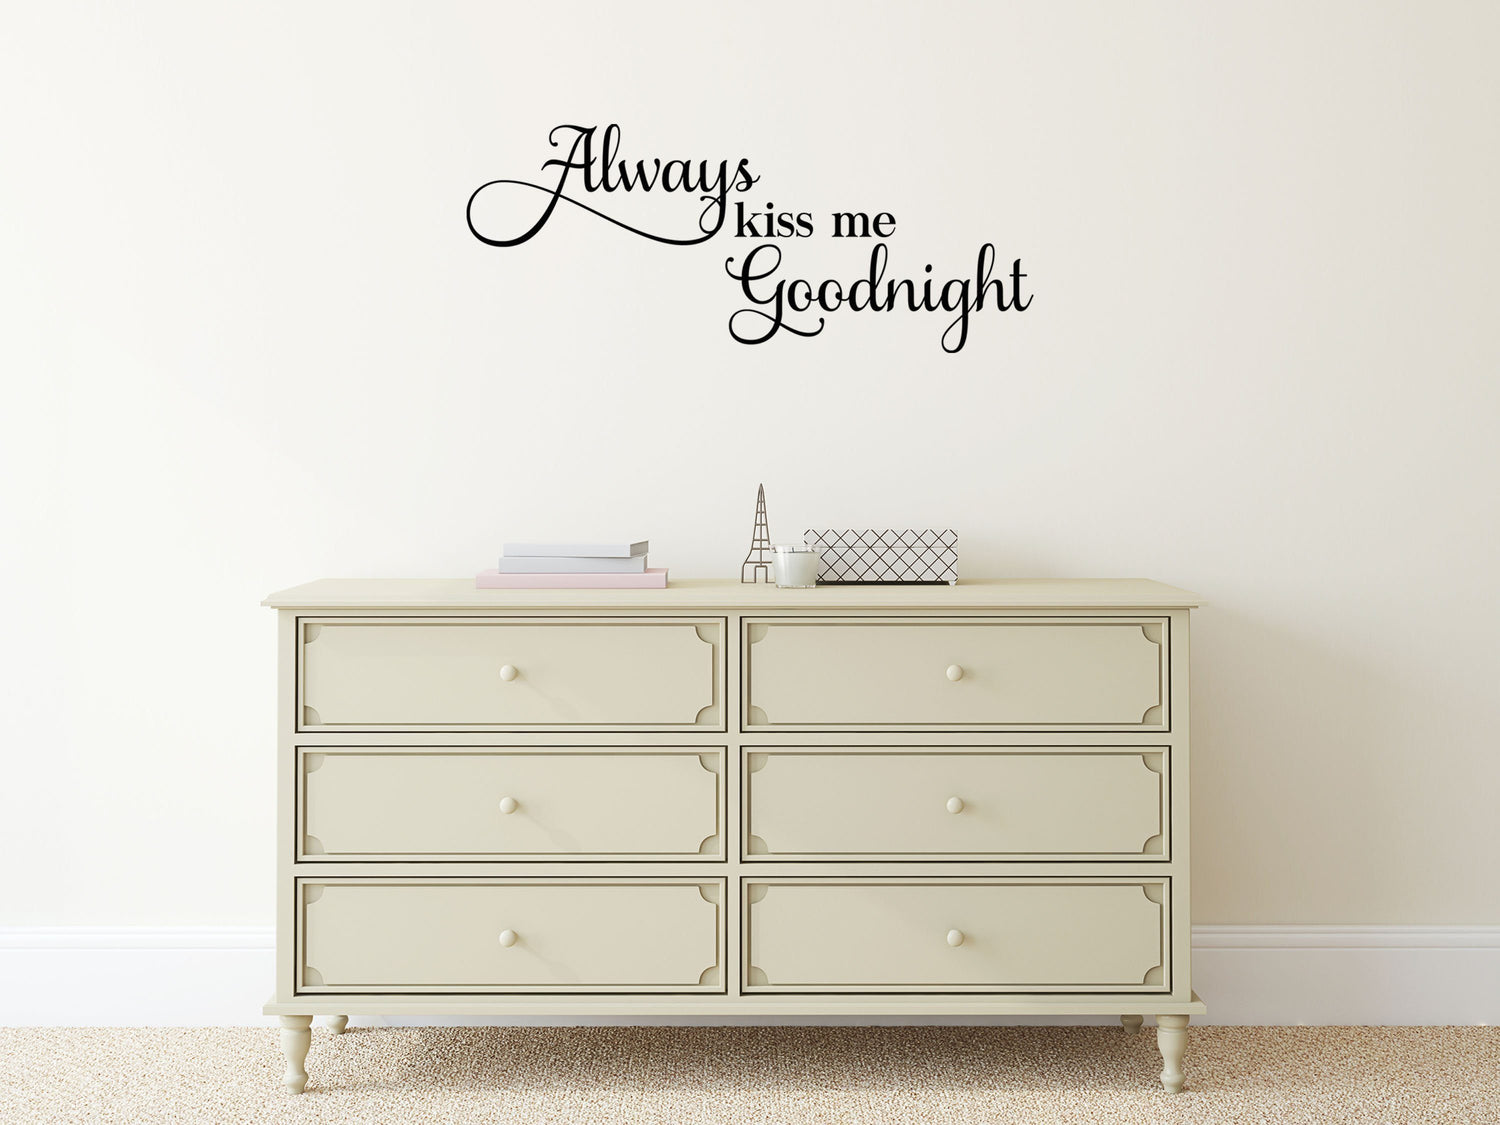 Always Kiss Me Goodnight Bedroom Quote Sticker - Inspirational Wall Decals Vinyl Wall Decal Done 